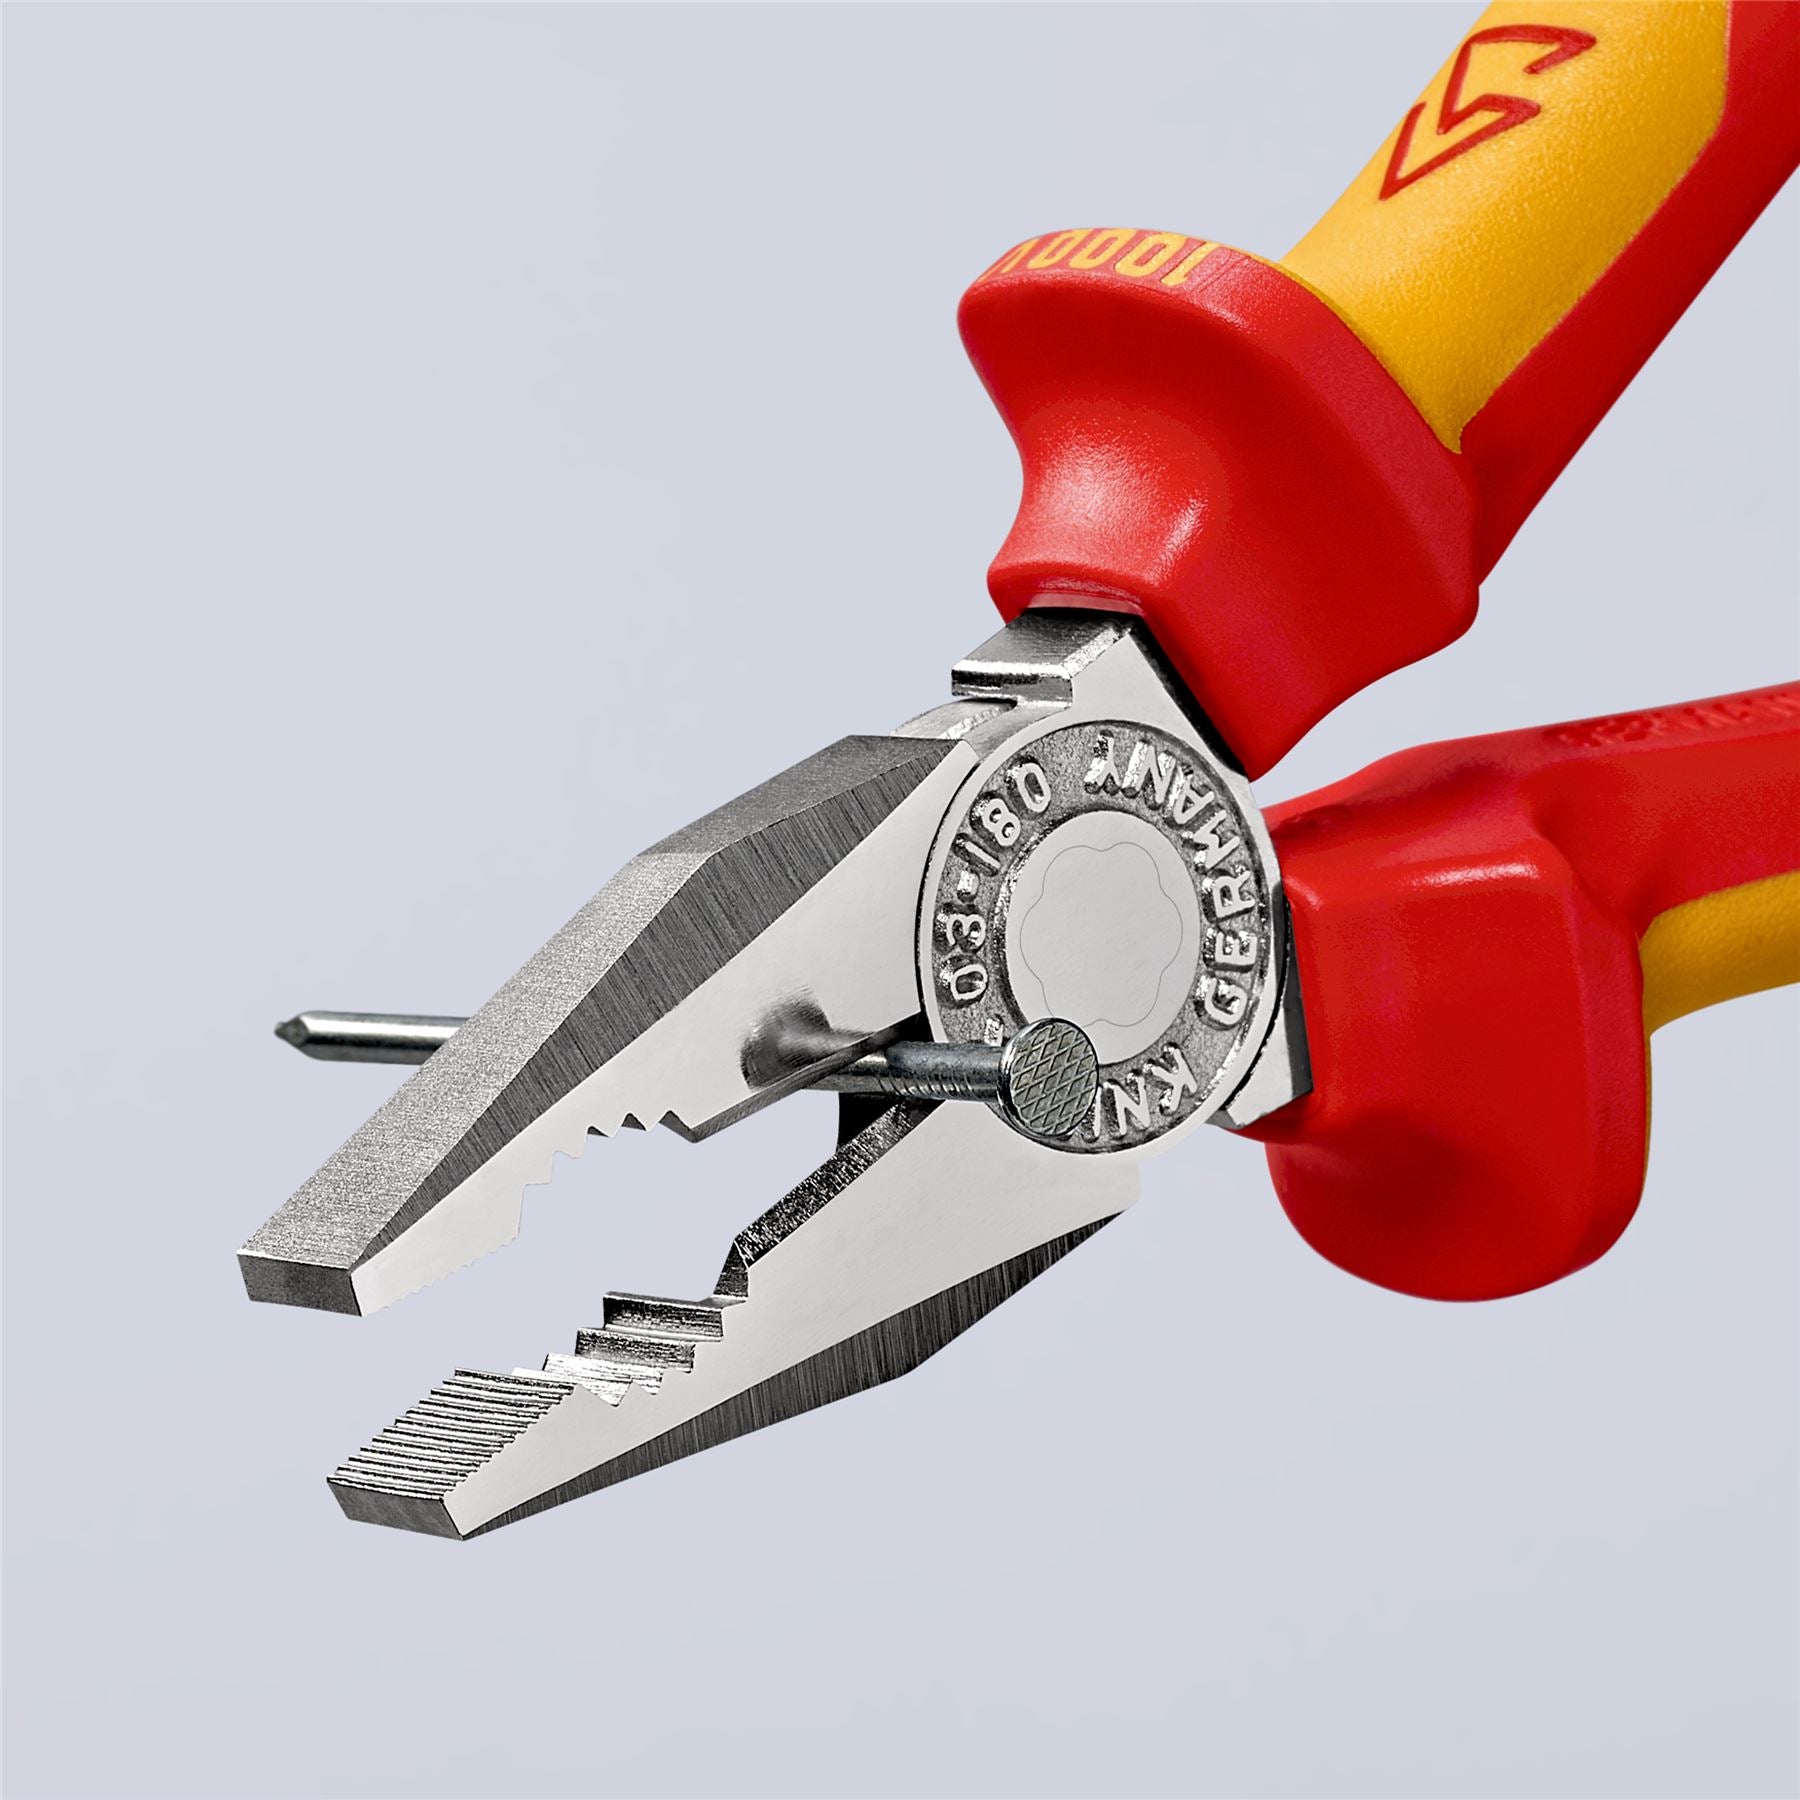 KNIPEX Combination Pliers 180mm VDE Chrome Multi Component Grips with Tether Point 03 06 180 T BK